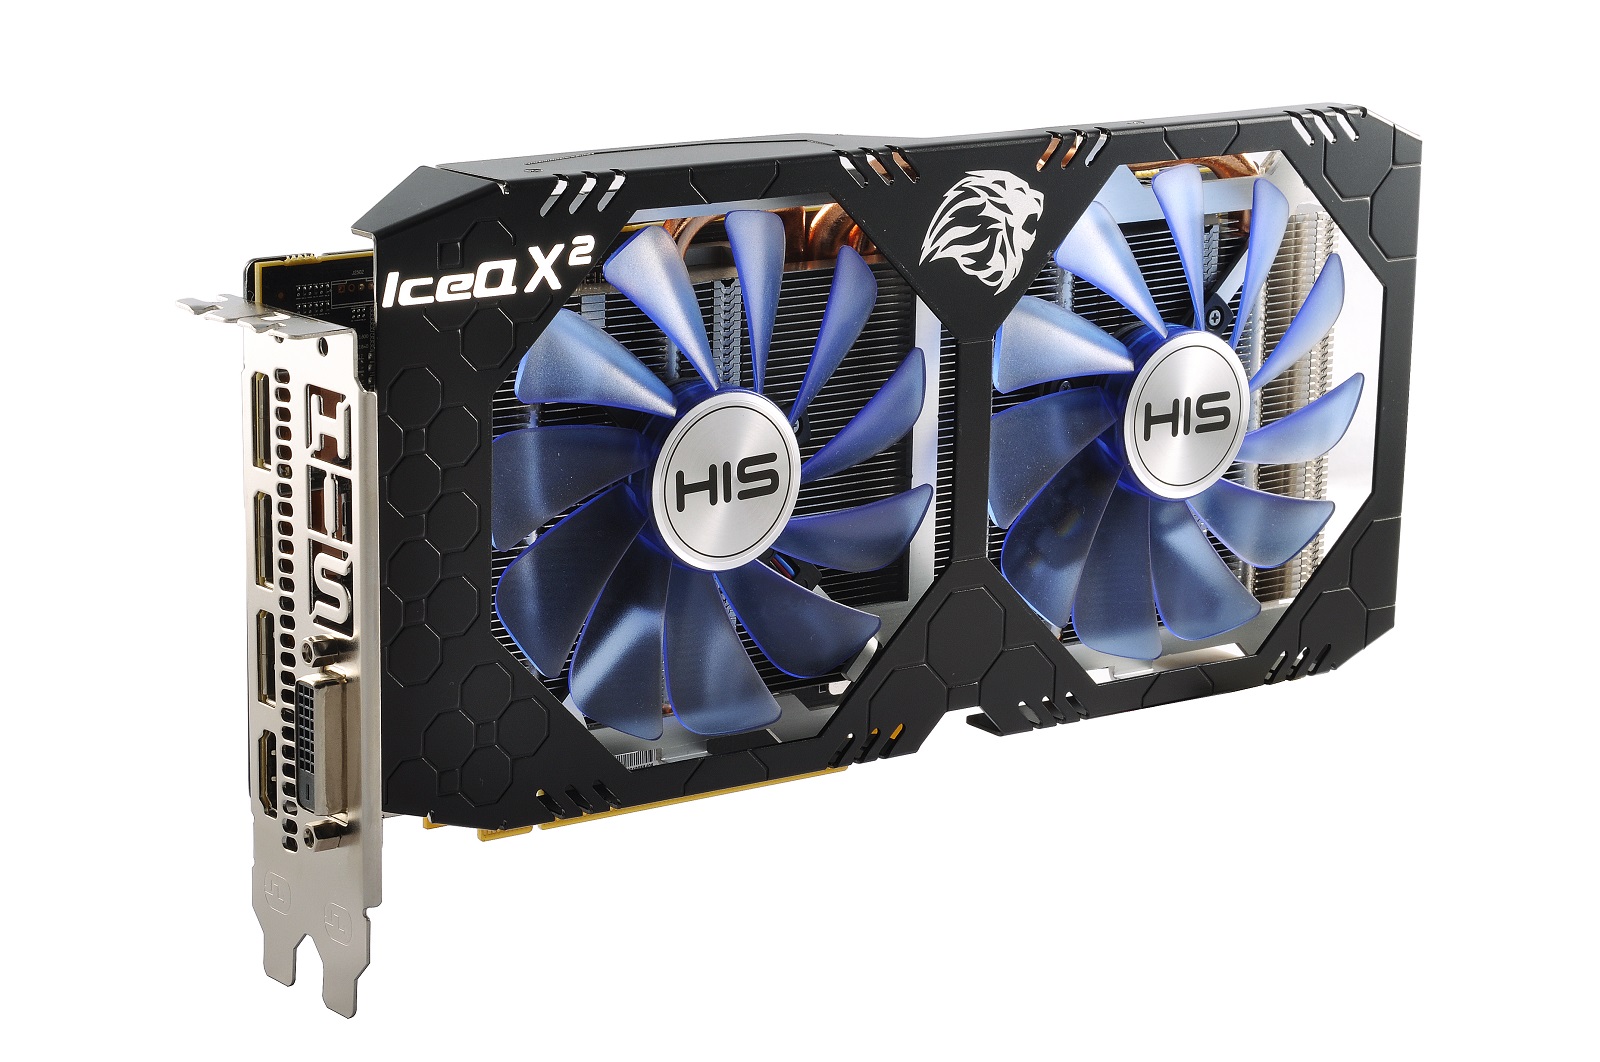 His Rx 580 Iceq X Oc 8gb Rx 580 Series Desktop Graphics Products His Graphic Cards